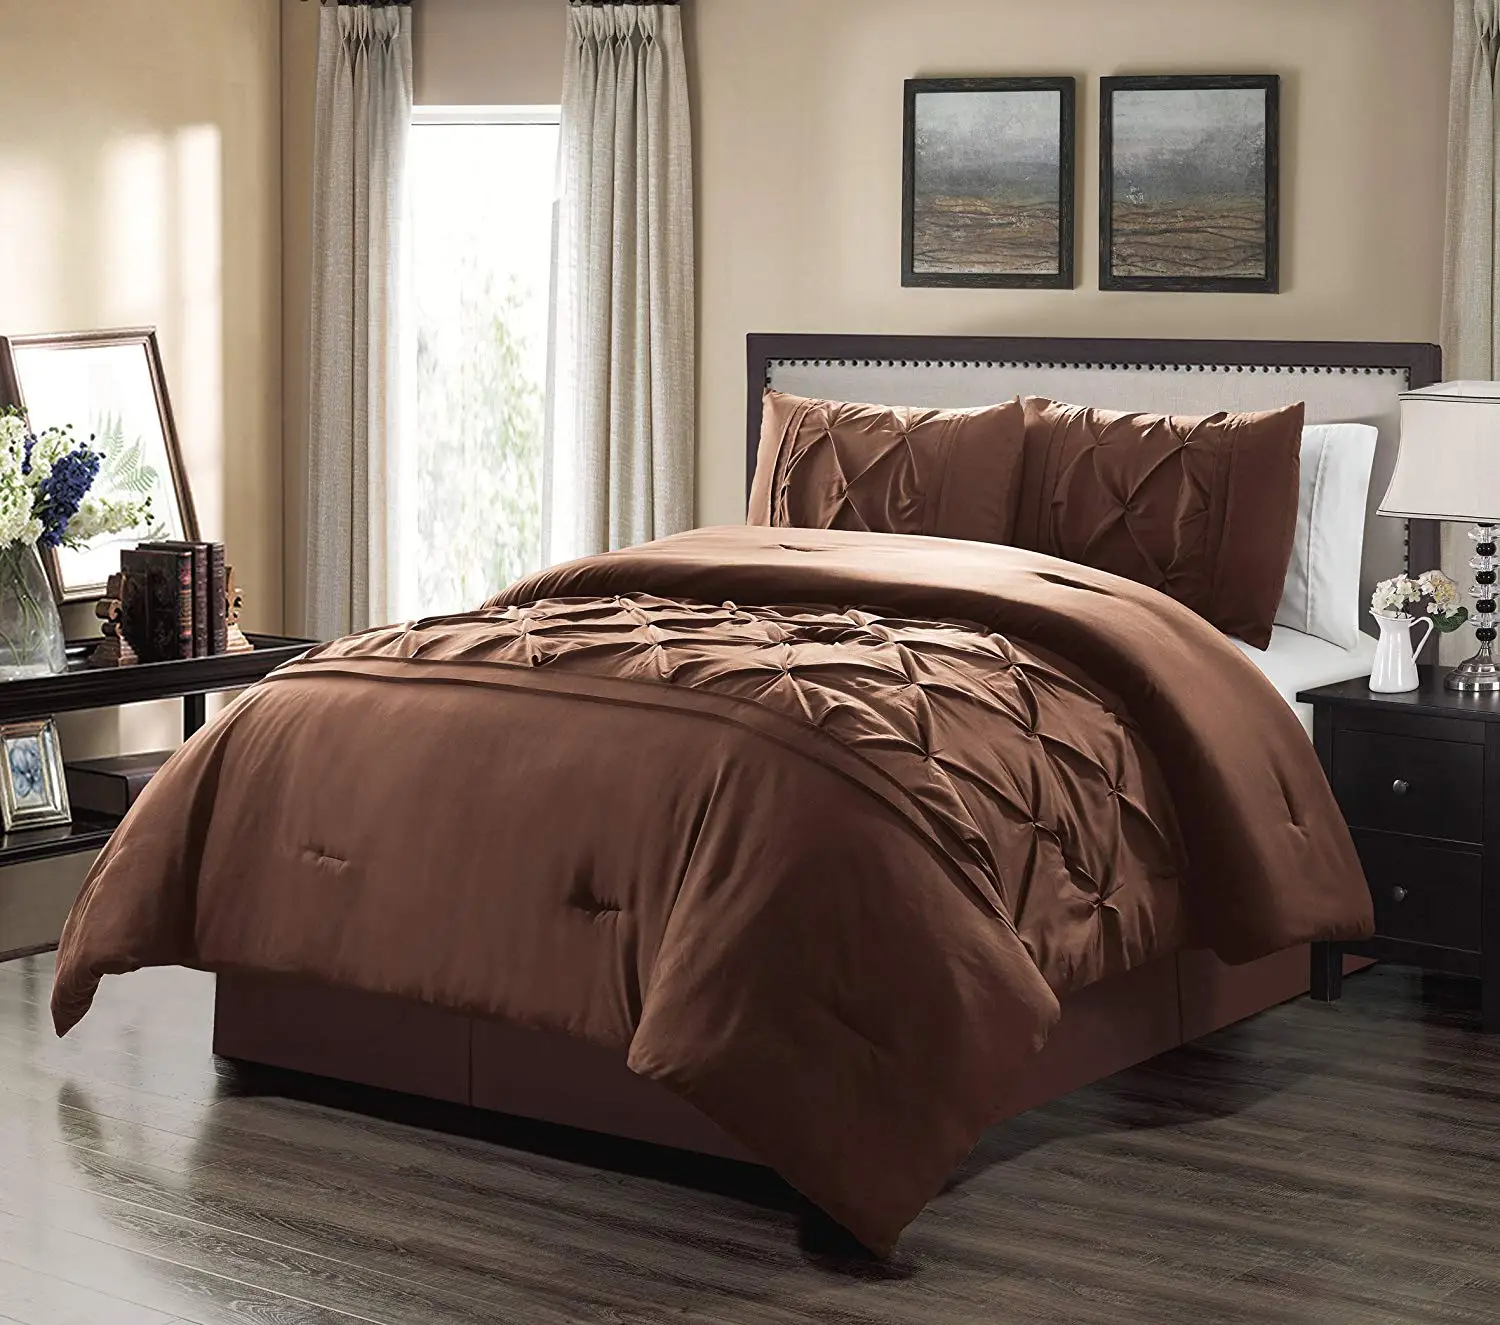 Cheap Brown King Comforter Find Brown King Comforter Deals On Line At Alibaba Com